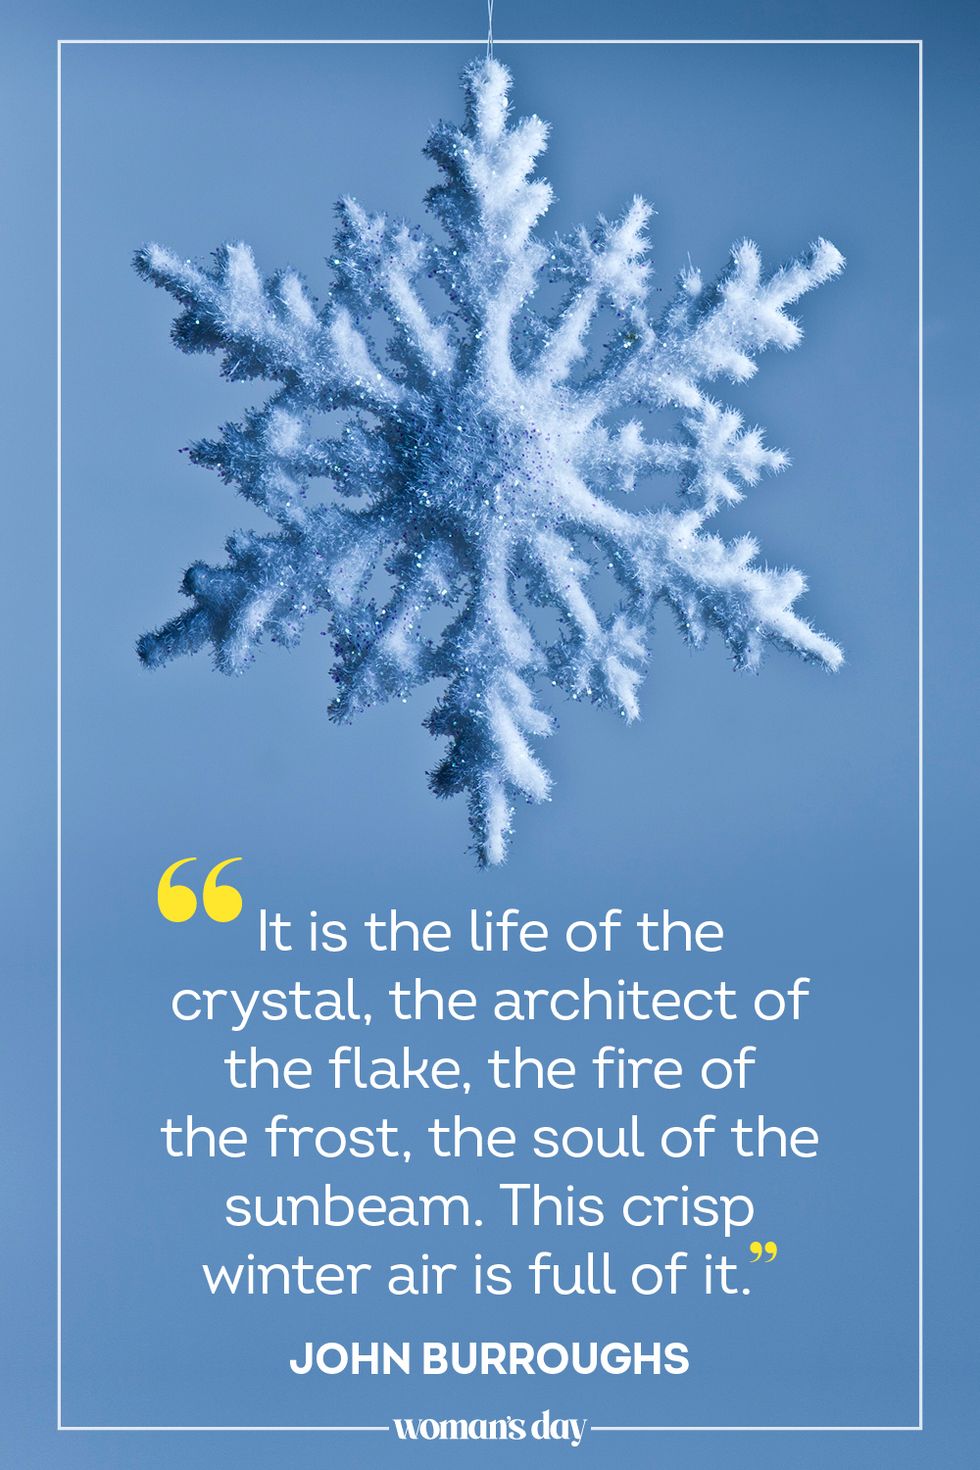 55 Best Winter Quotes: Sayings That Capture the Season